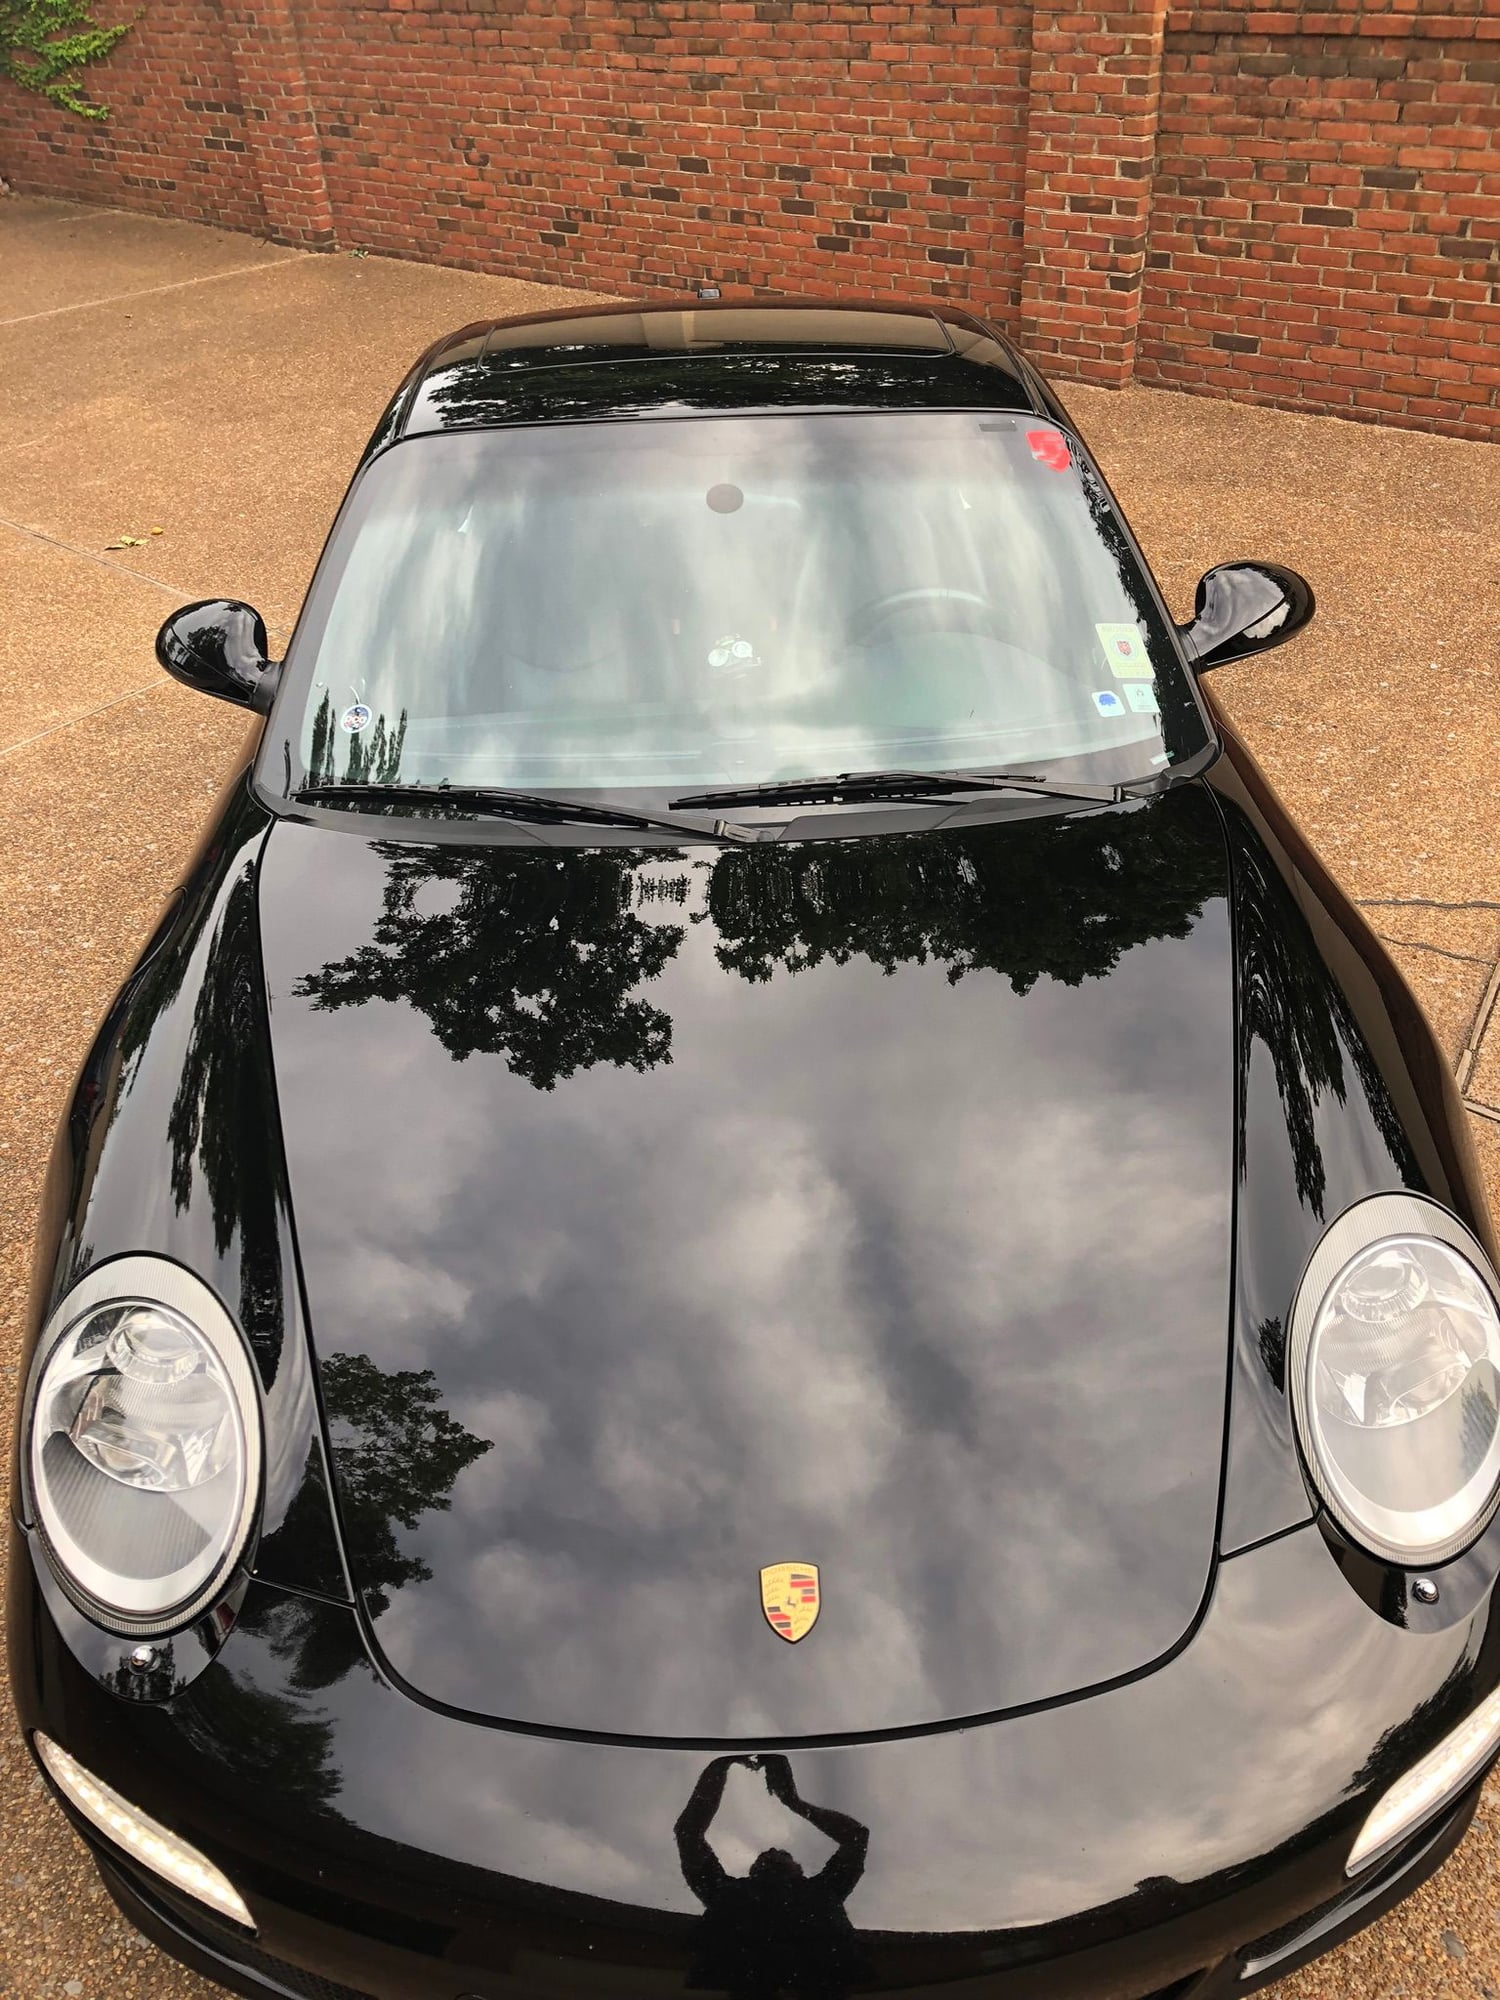 2011 Porsche 911 - 2011 997.2S - Fidelity Platinum Until 04/14/2020 OR 78,500 Miles - Used - VIN WP0AB2A95BS721557 - 46,000 Miles - 6 cyl - 2WD - Automatic - Coupe - Black - Memphis, TN 38120, United States